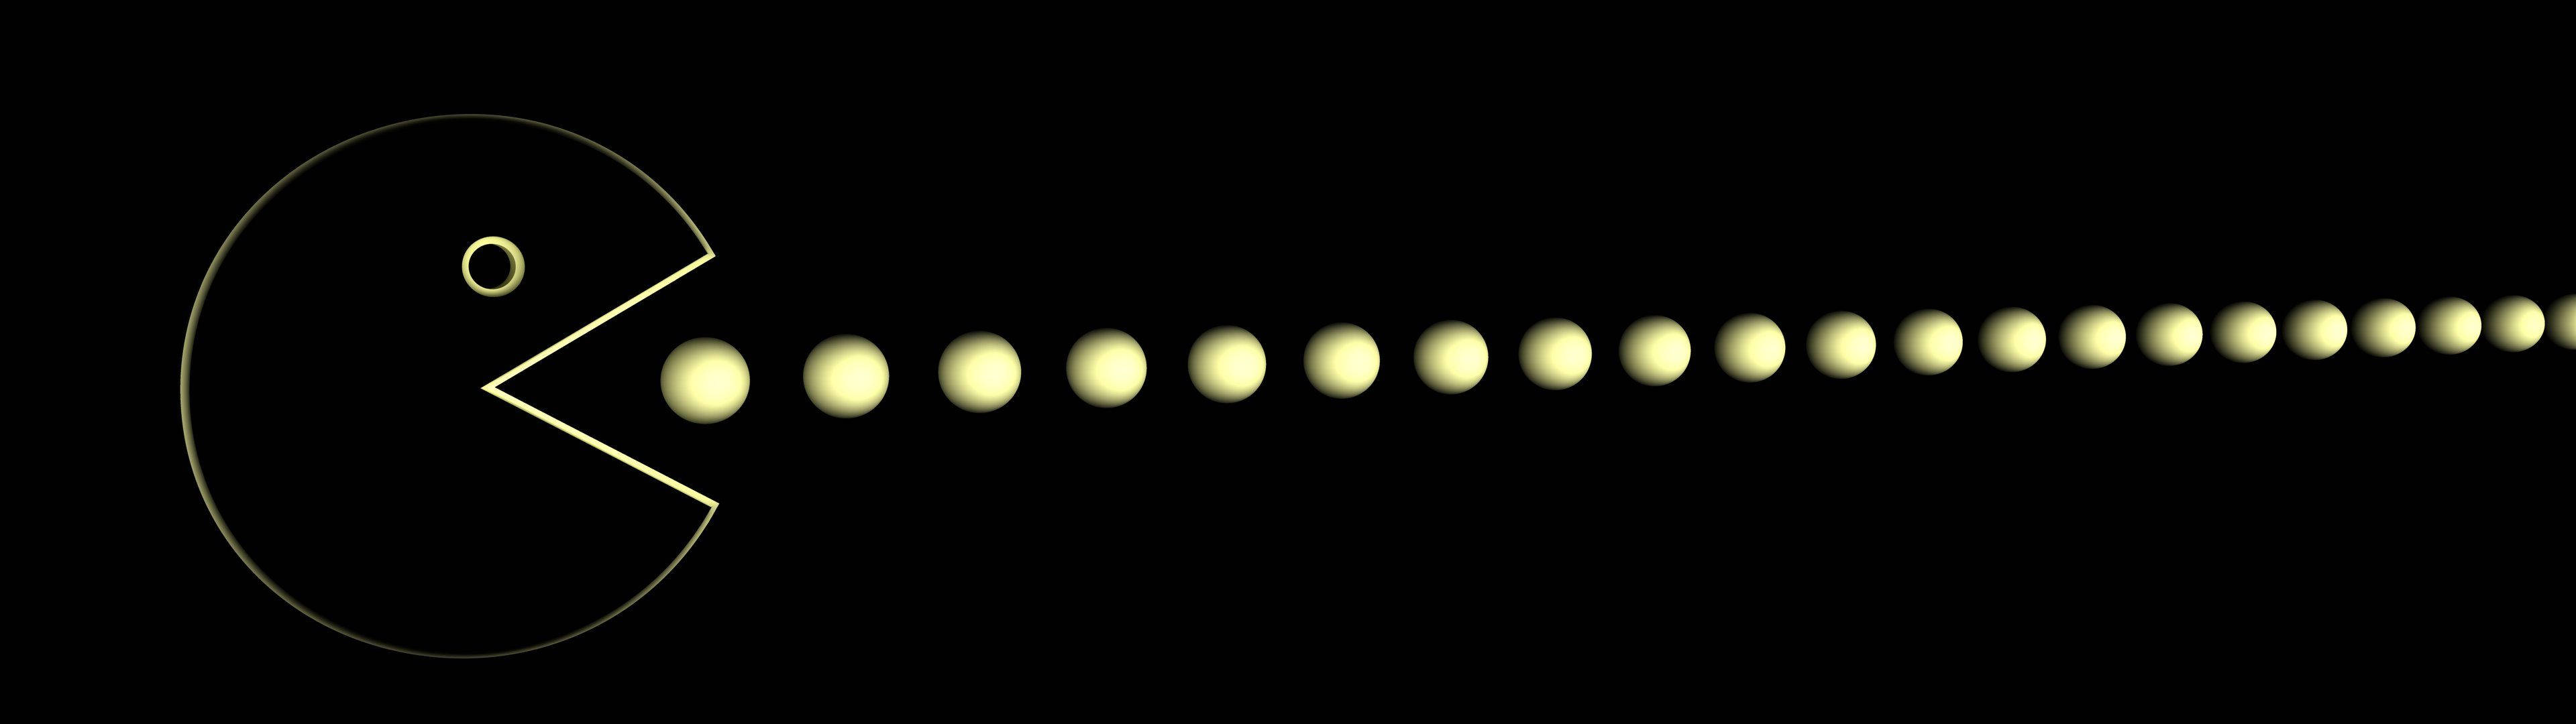 A Line Of Dots With A Yellow Light Wallpaper